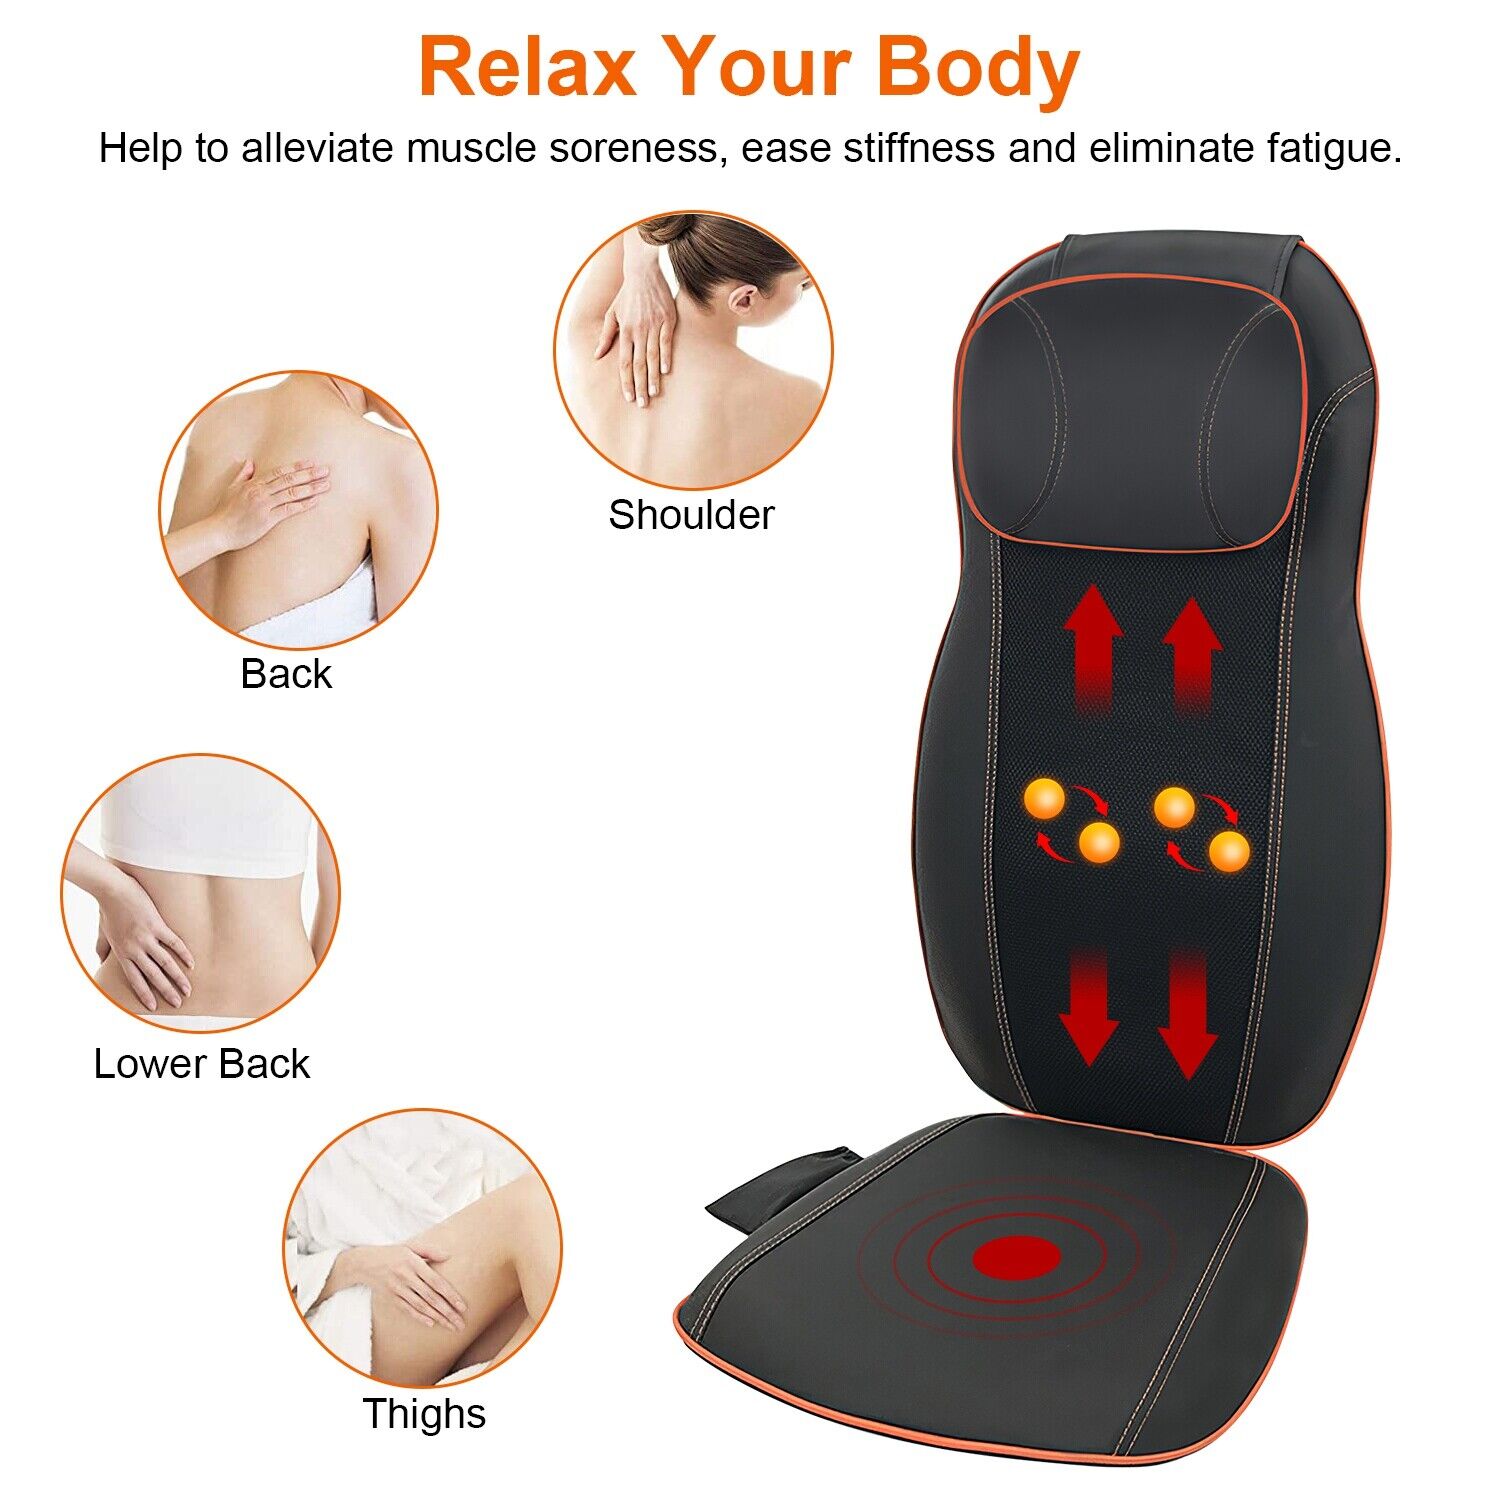 imountek Electric Vibration Back Massager with Heat for Pain Stress Relief w/ Controller